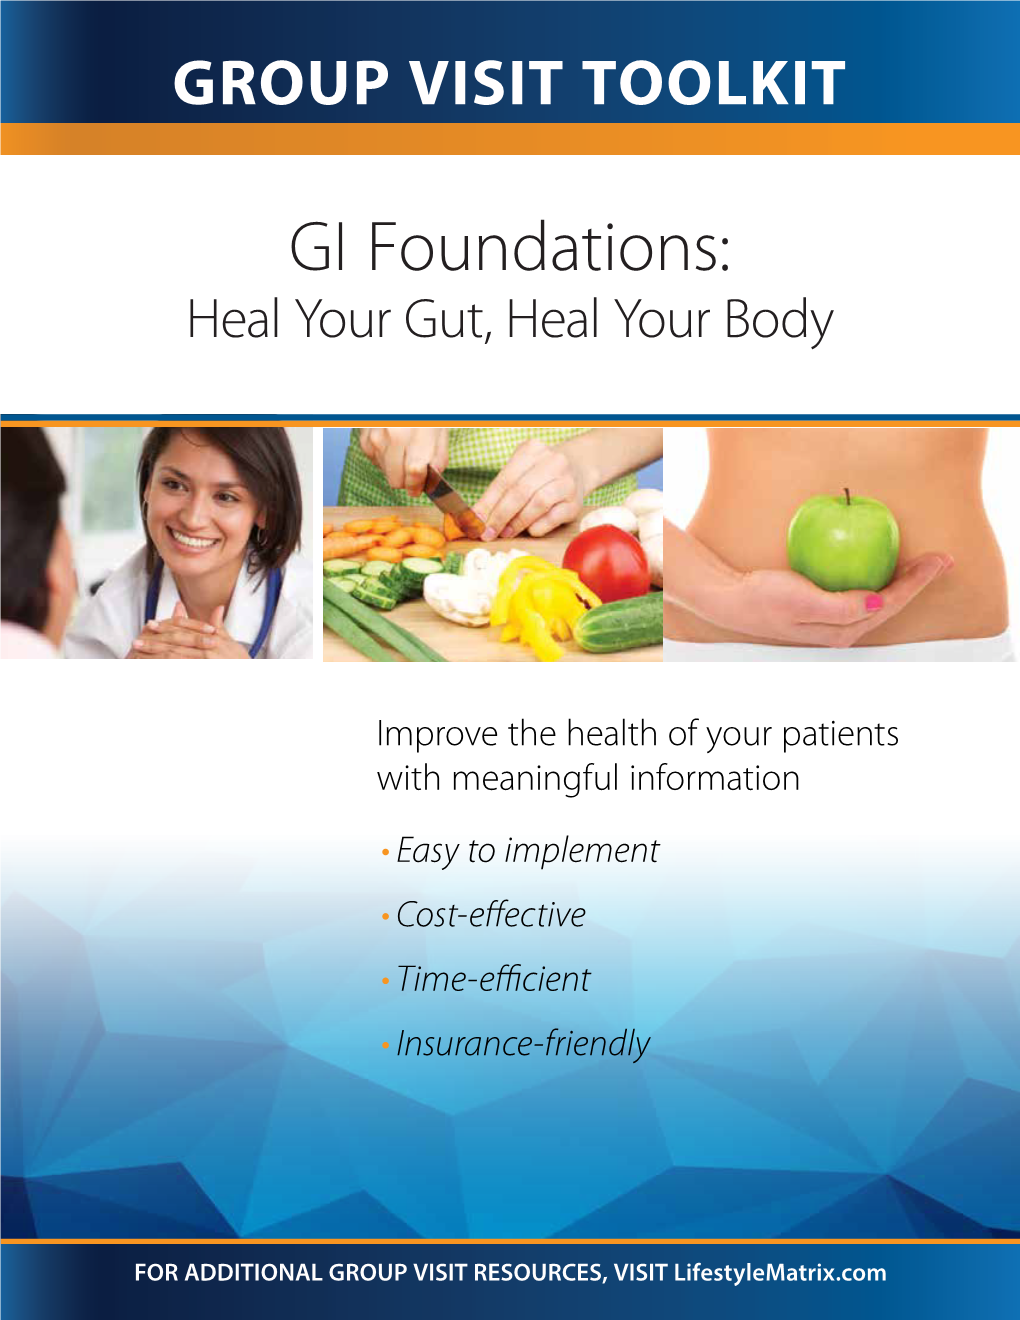 GI Foundations: Heal Your Gut, Heal Your Body